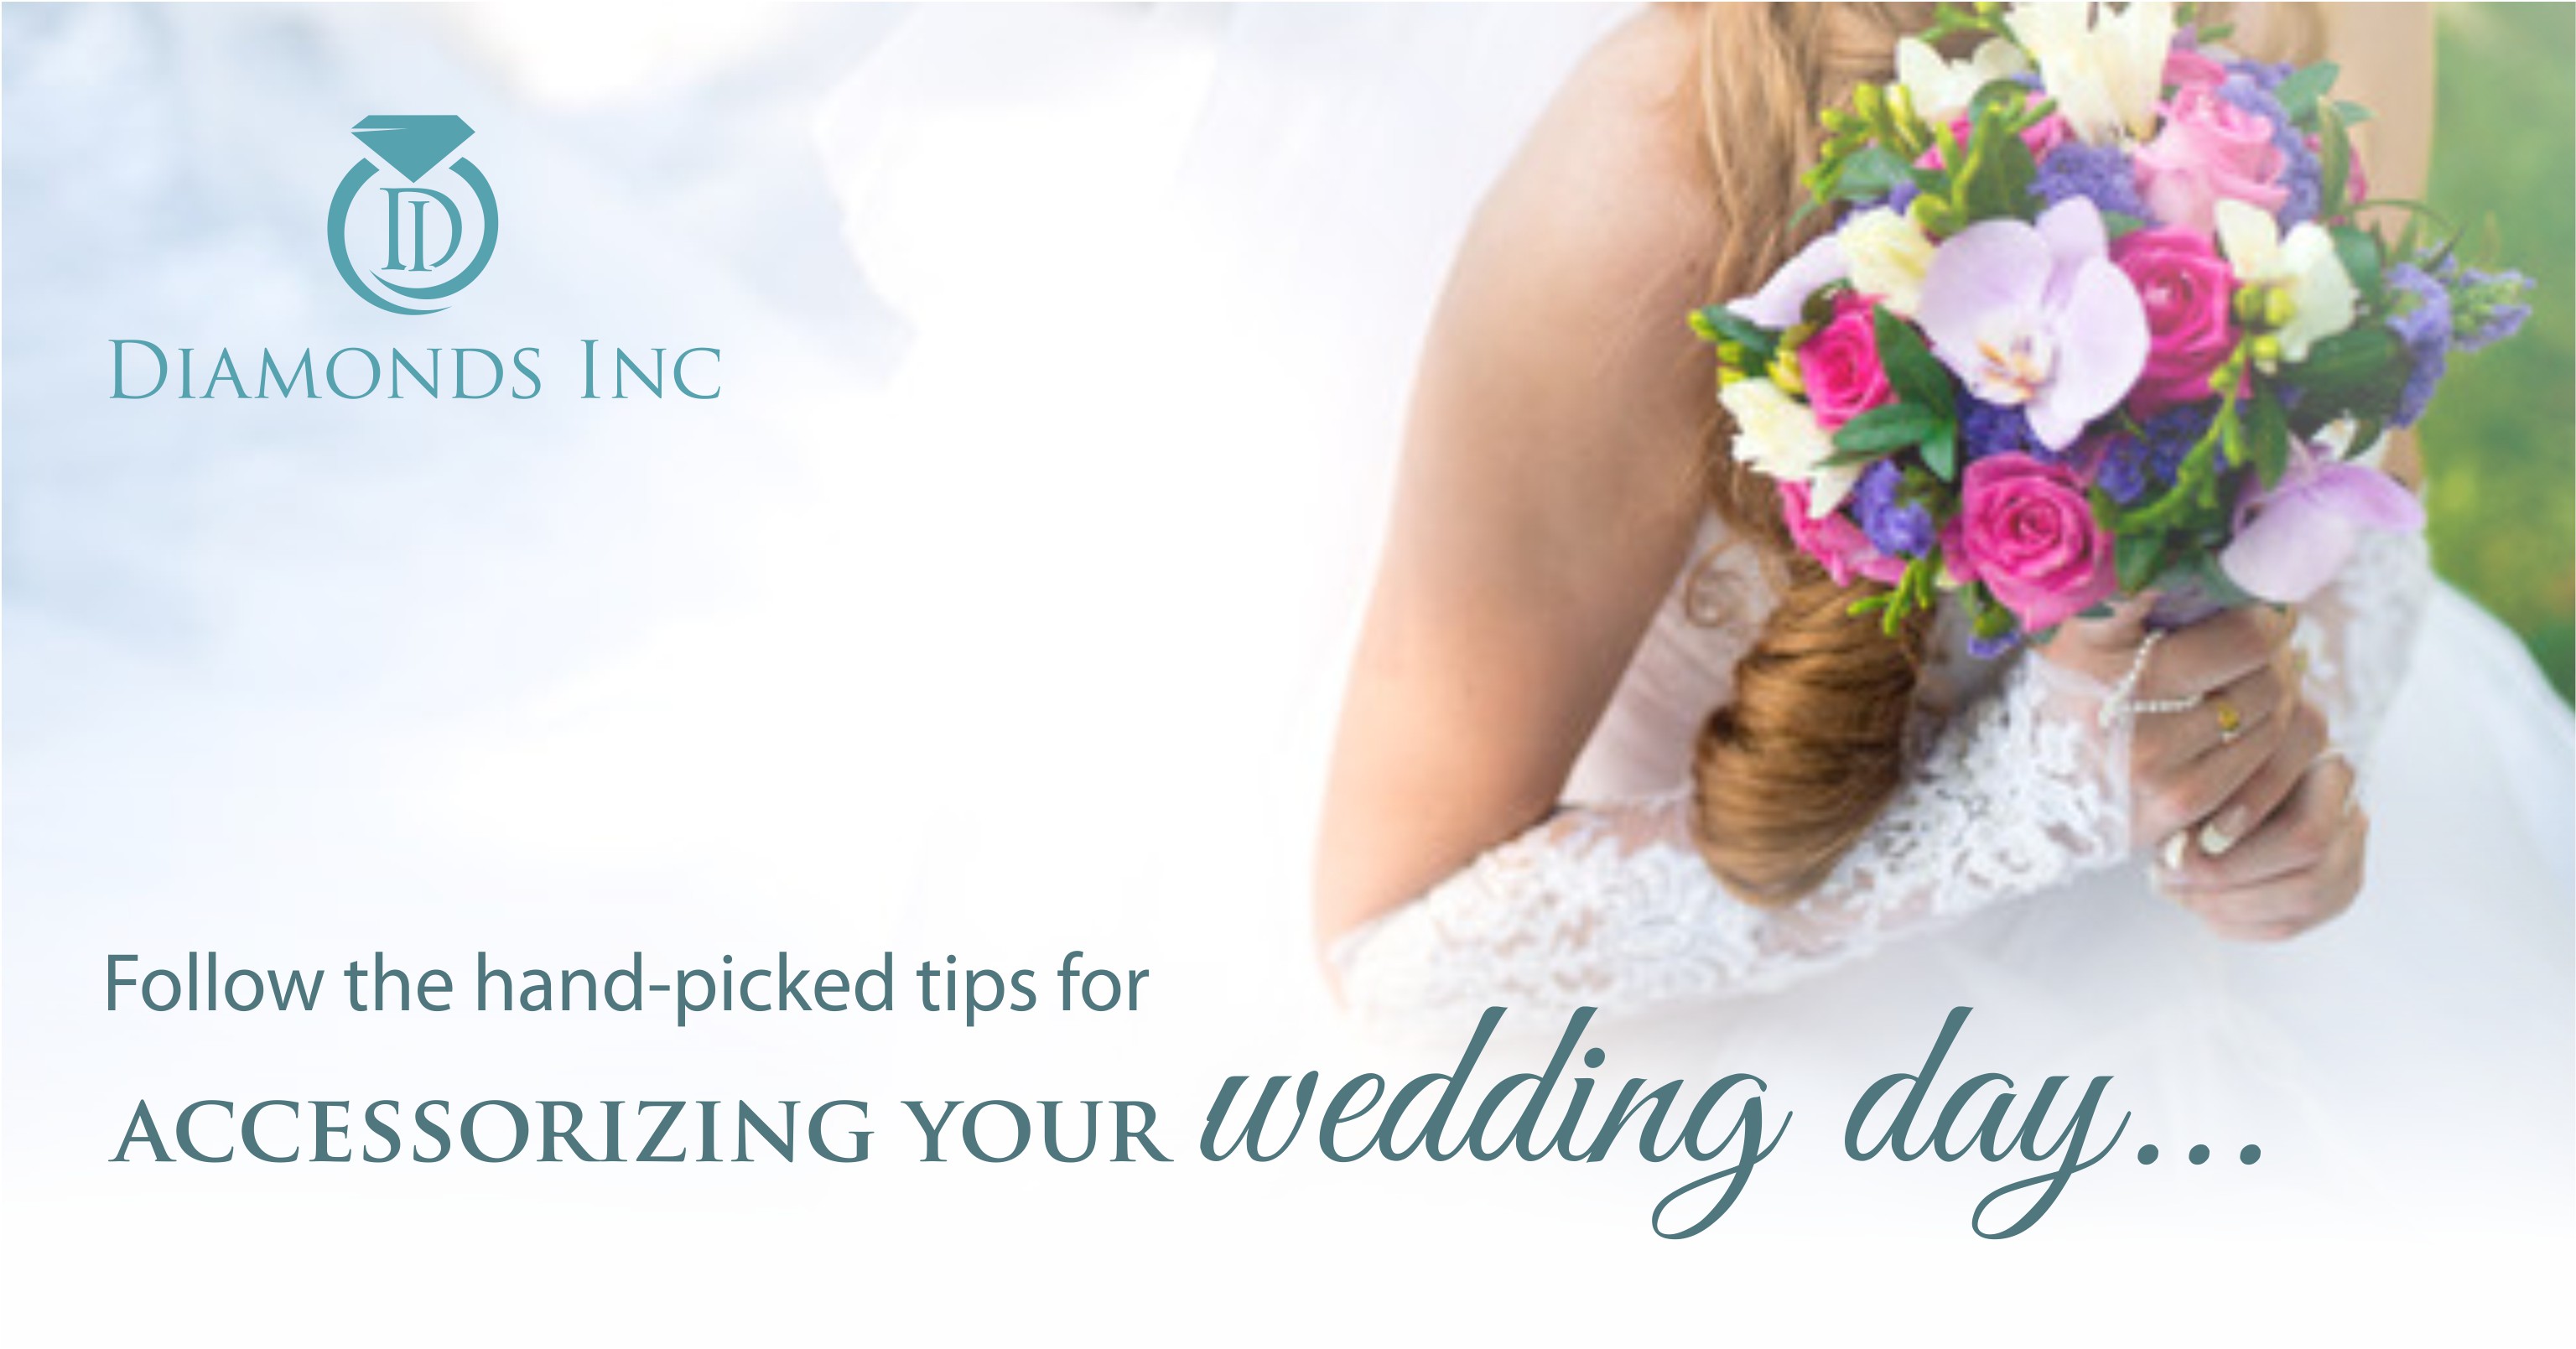 Follow the hand-picked tips for accessorizing your wedding day